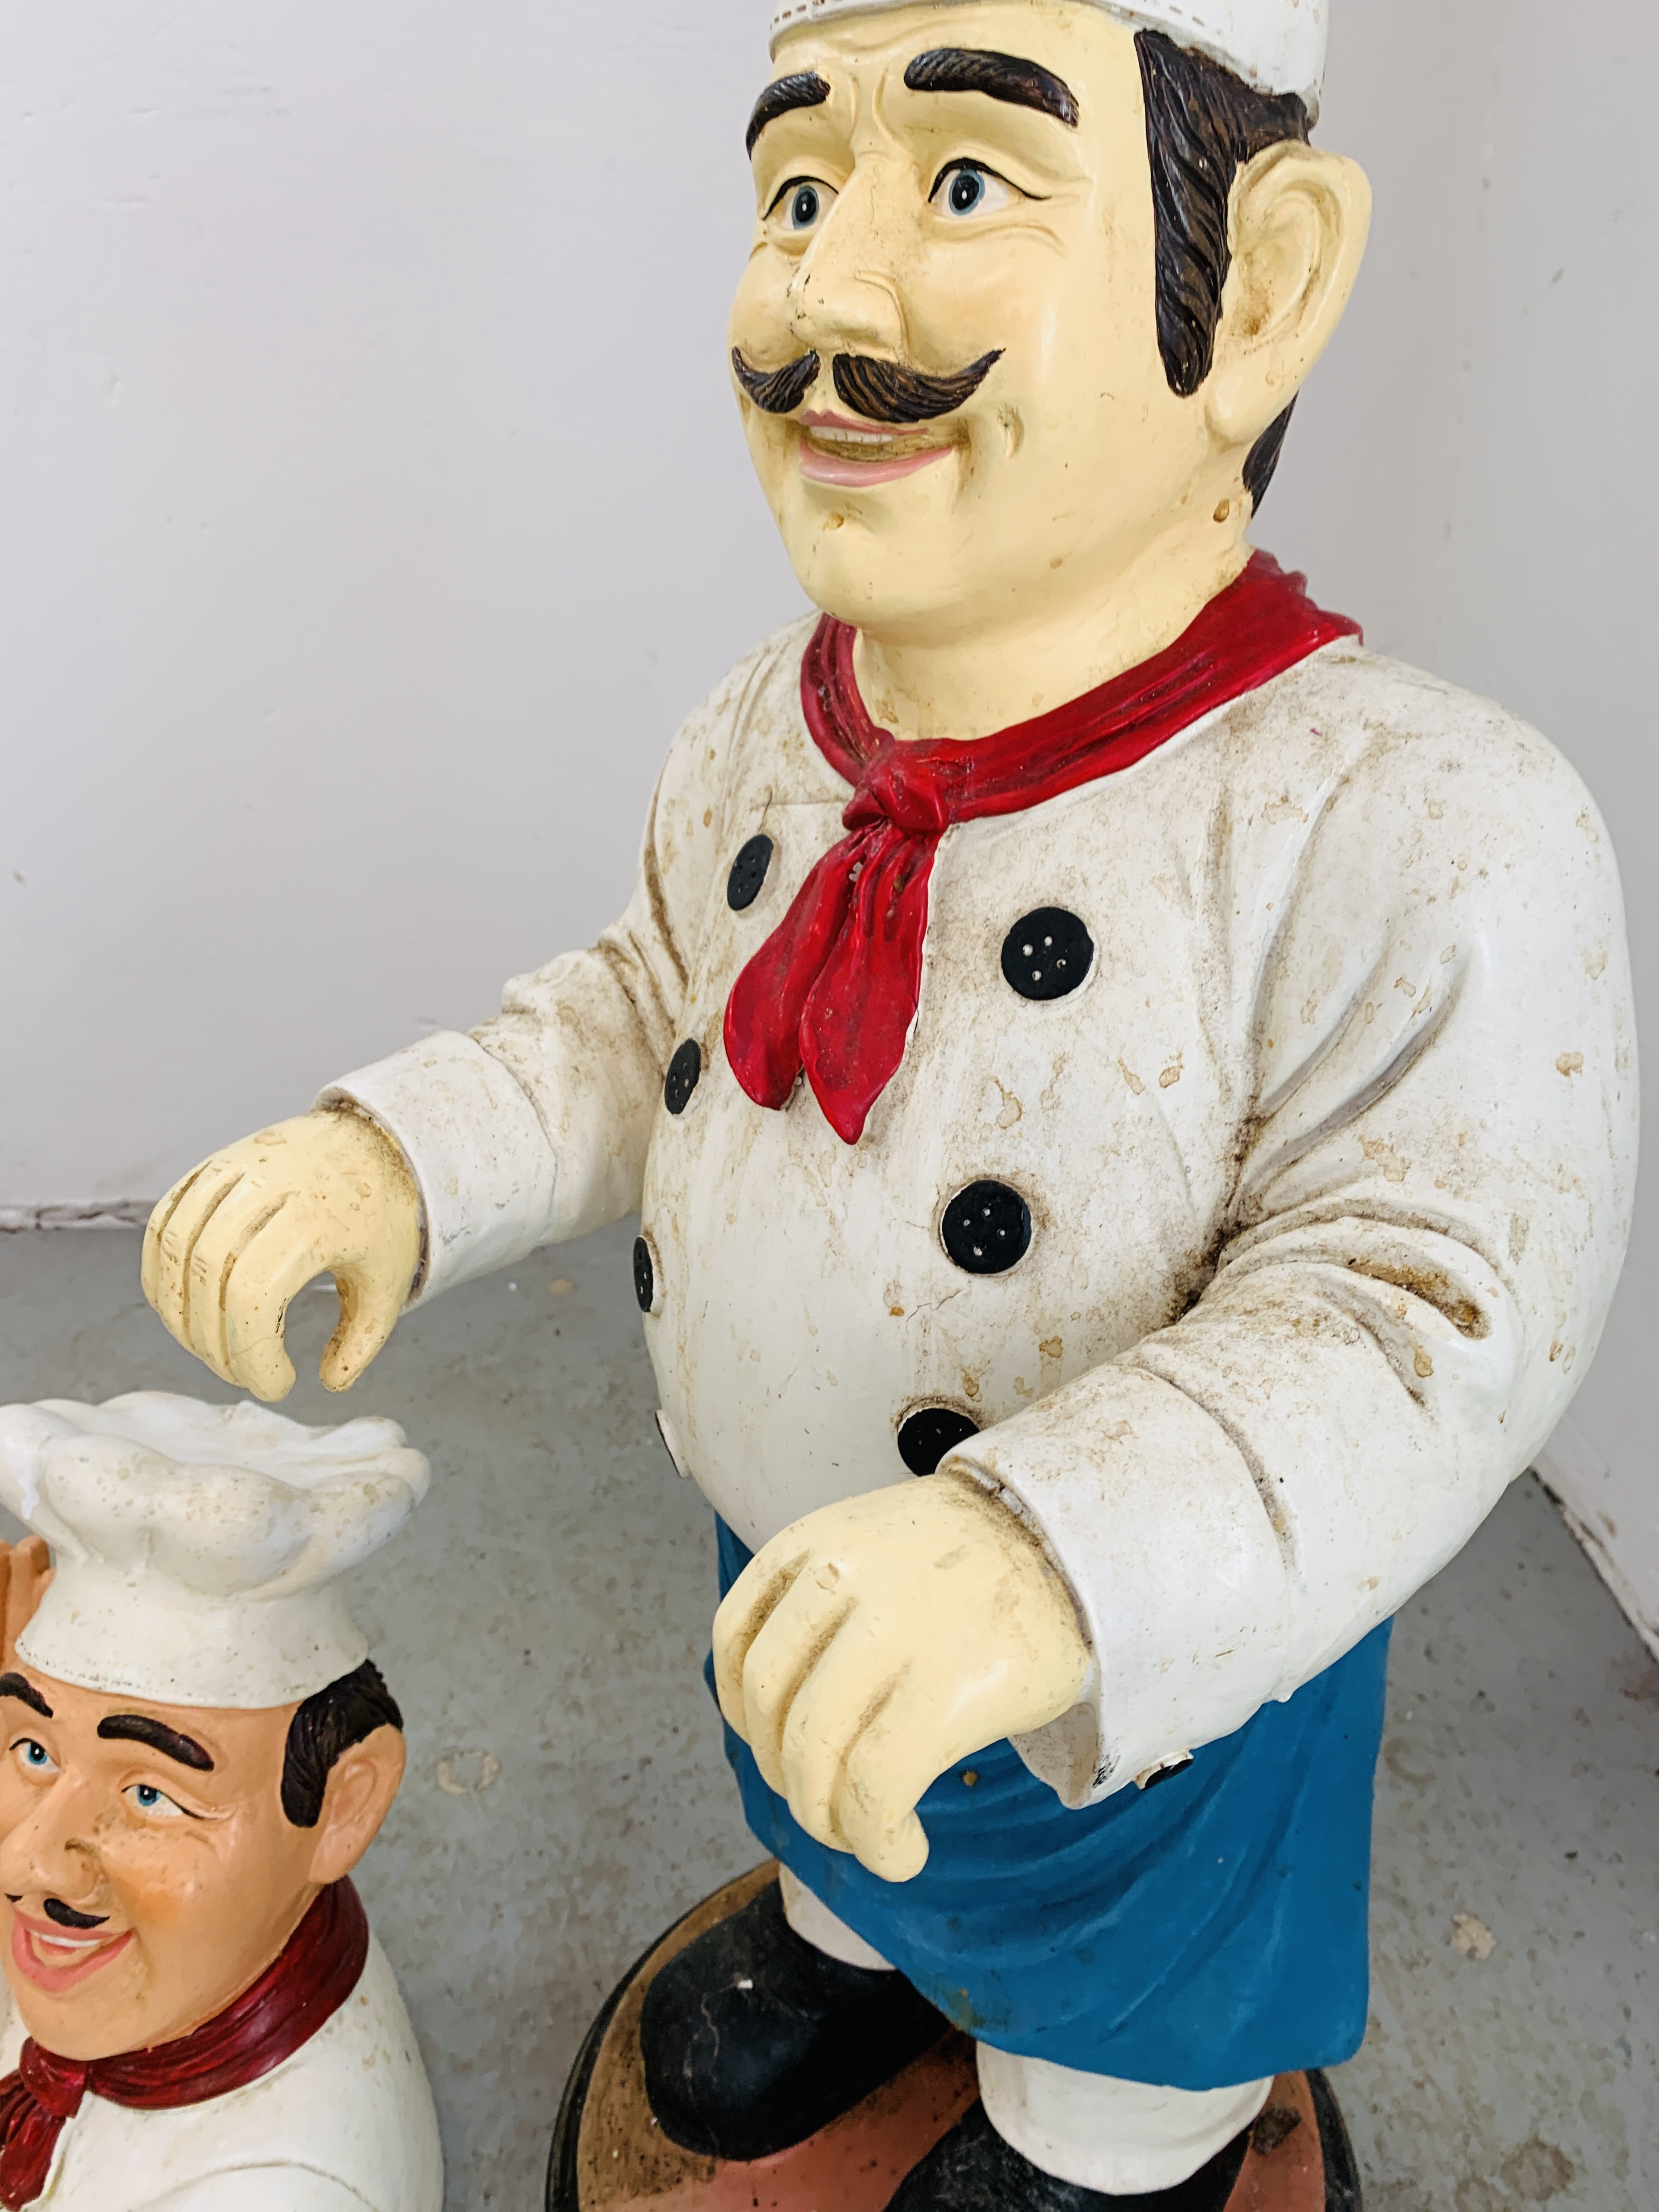 A NOVELTY STANDING "CHEF" FIGURE A/F AND ONE OTHER "CHEF" FIGURE - Image 5 of 12